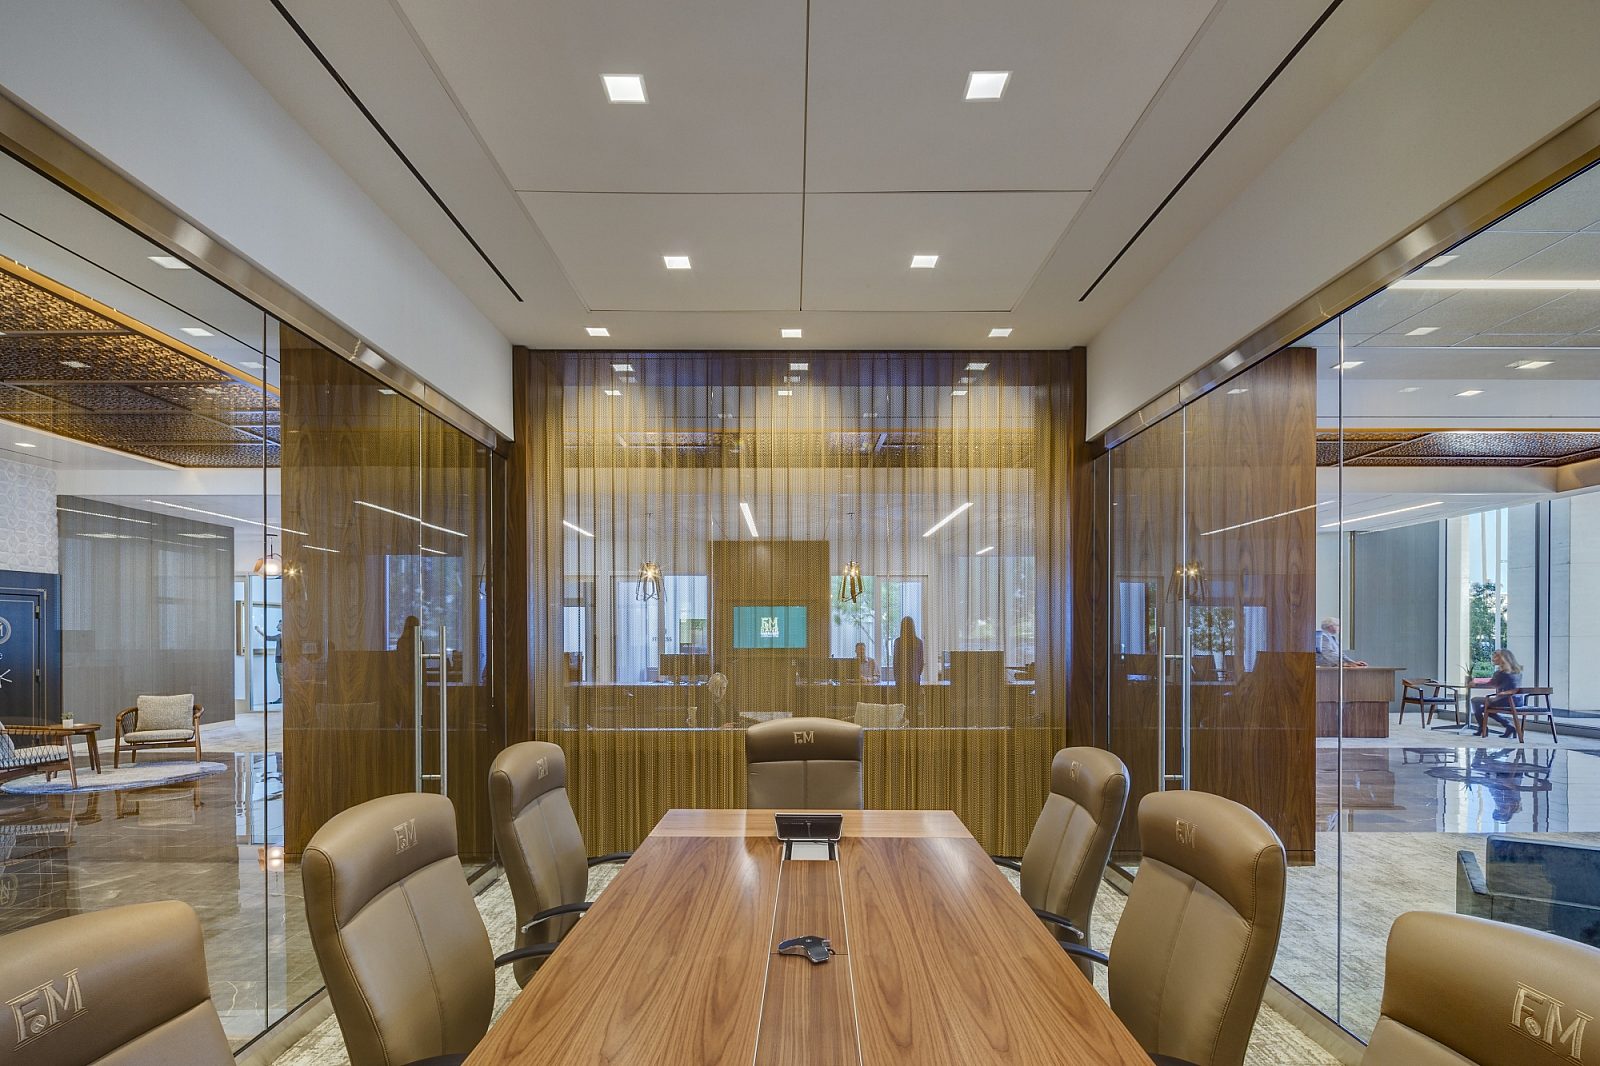 In a conference room, there's a wooden conference table and leather desk chairs.